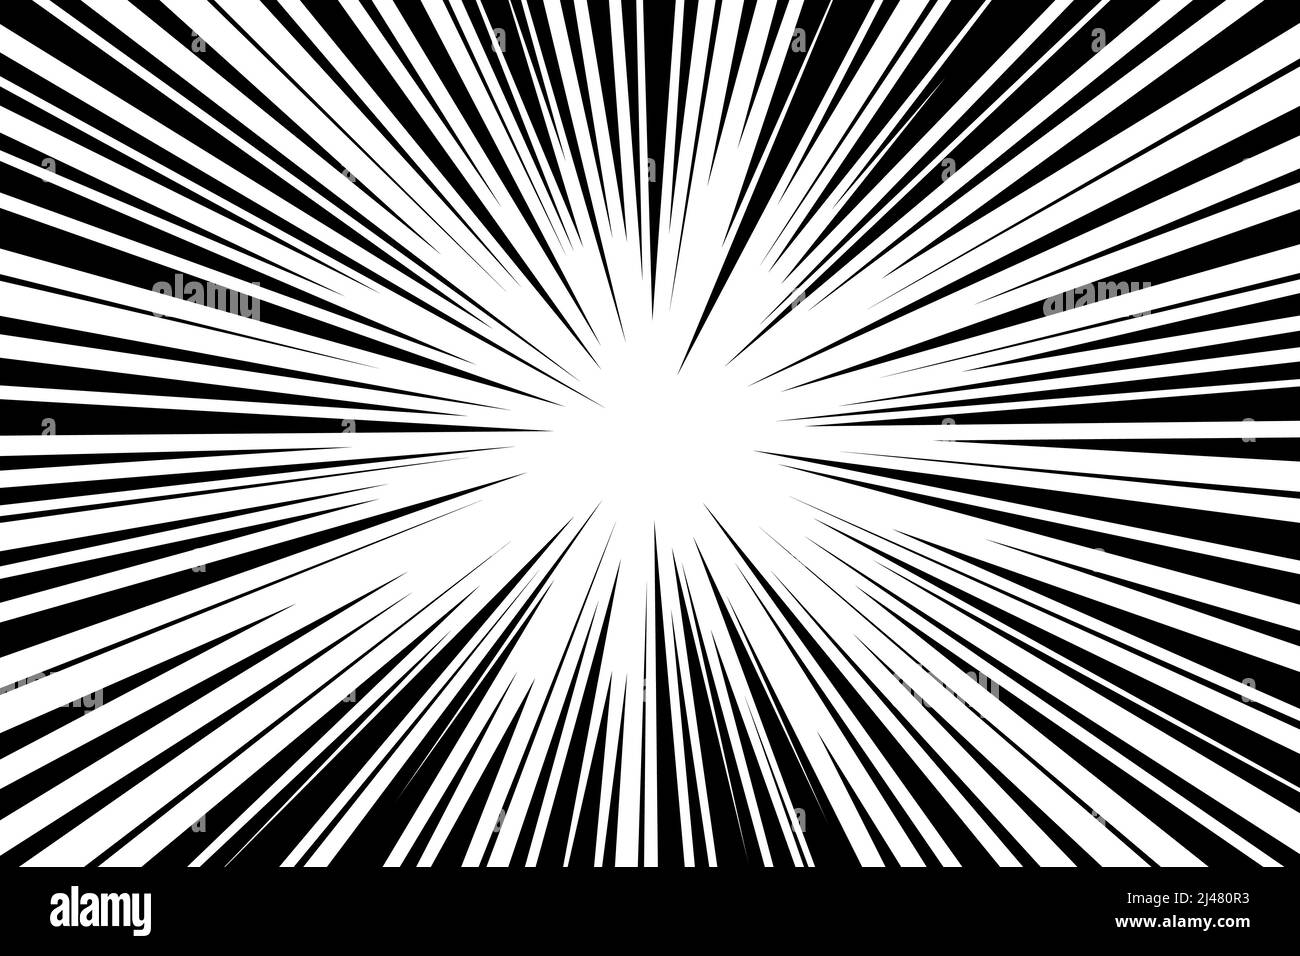 Radial line drawing. Action, speed lines, stripes, Stock vector